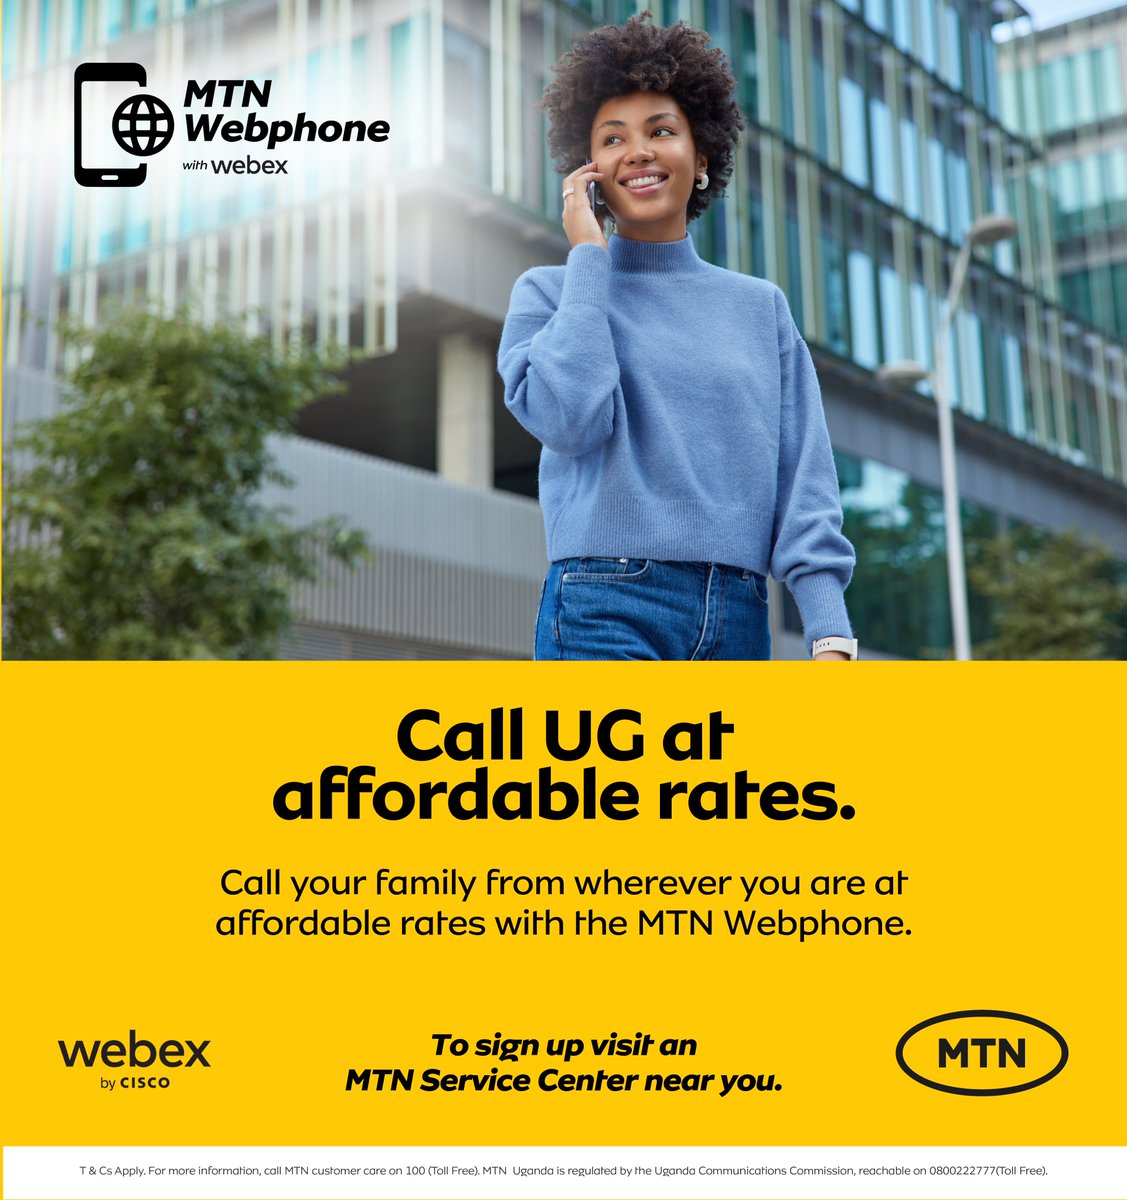 Hey there, you can now take your lugambo overseas at affordable local call rates with #MTNWebPhone from WebEx

Sign up today via a close service center and keep the kiboozi flowing at a low cost.
#TogetherWeAreUnstoppable